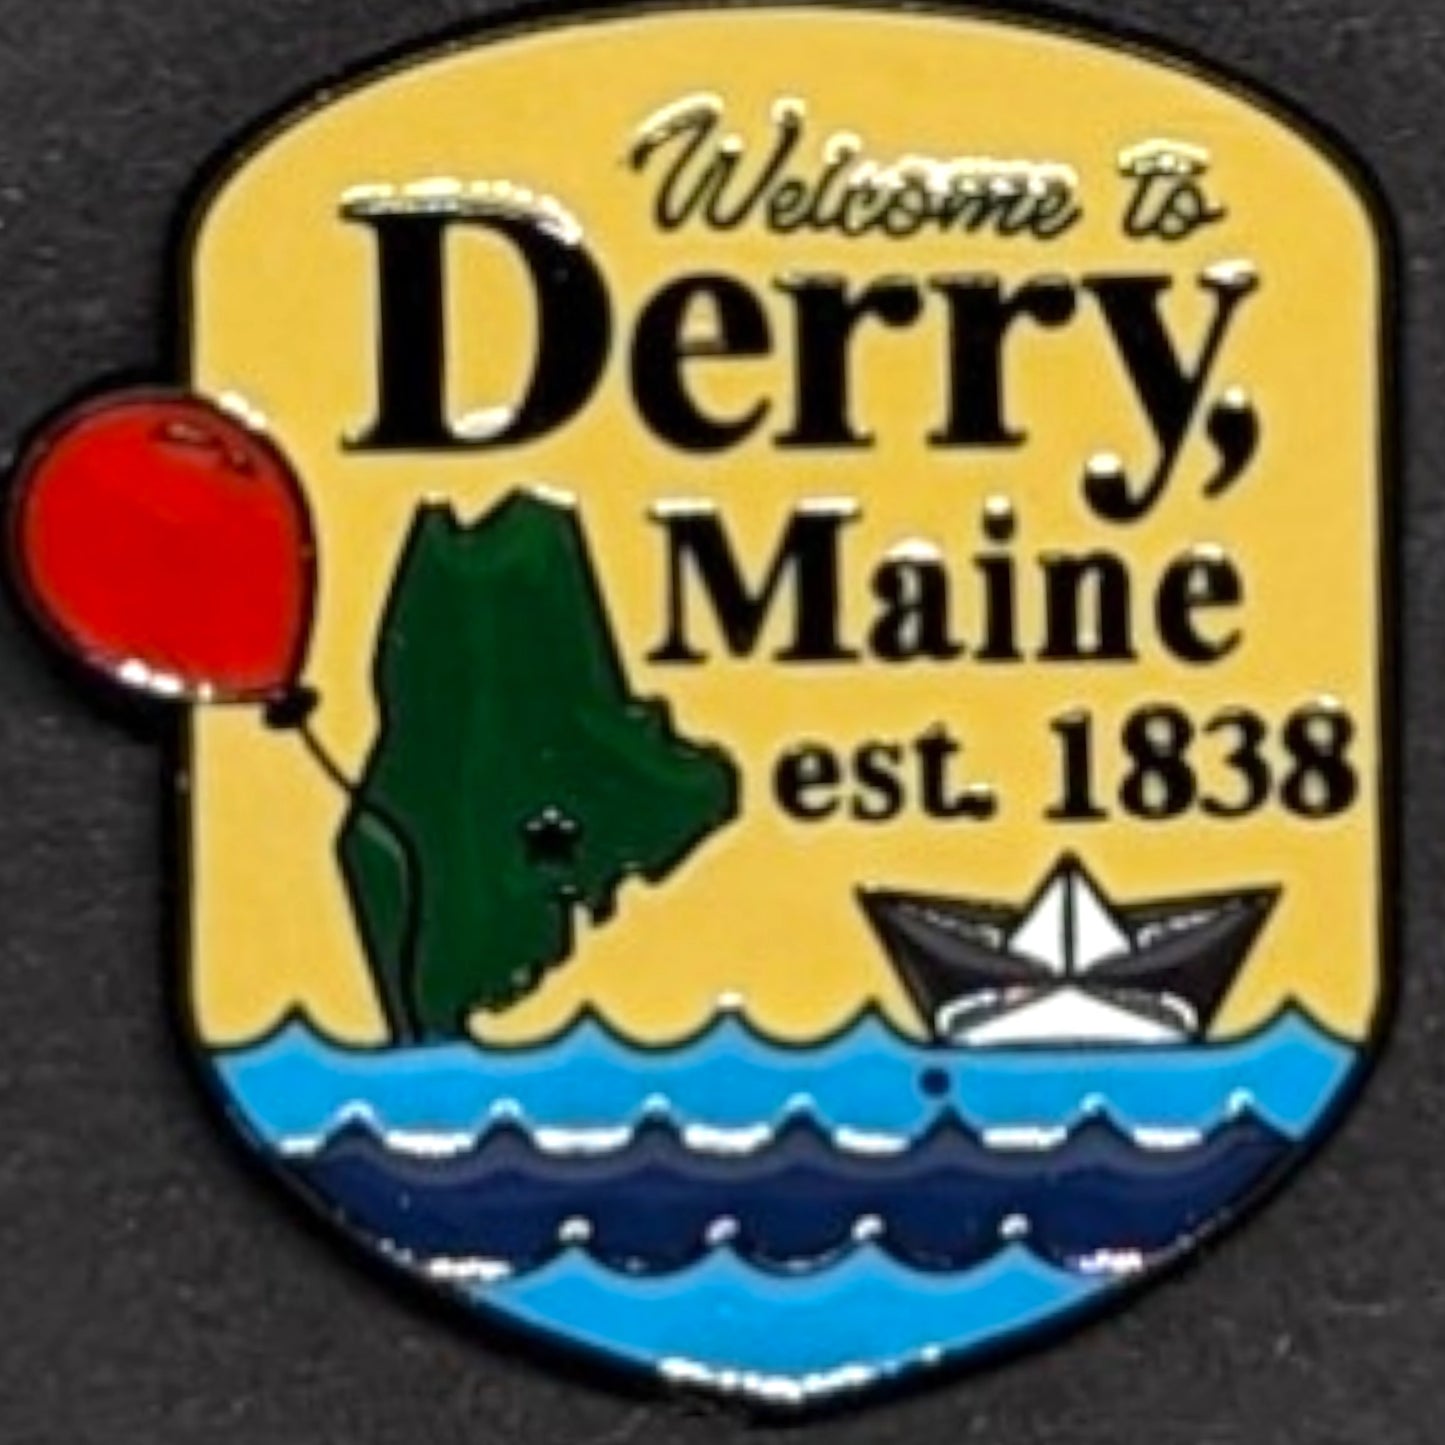 Welcome to Derry, Maine Est. 1838 Enamel Pin #205